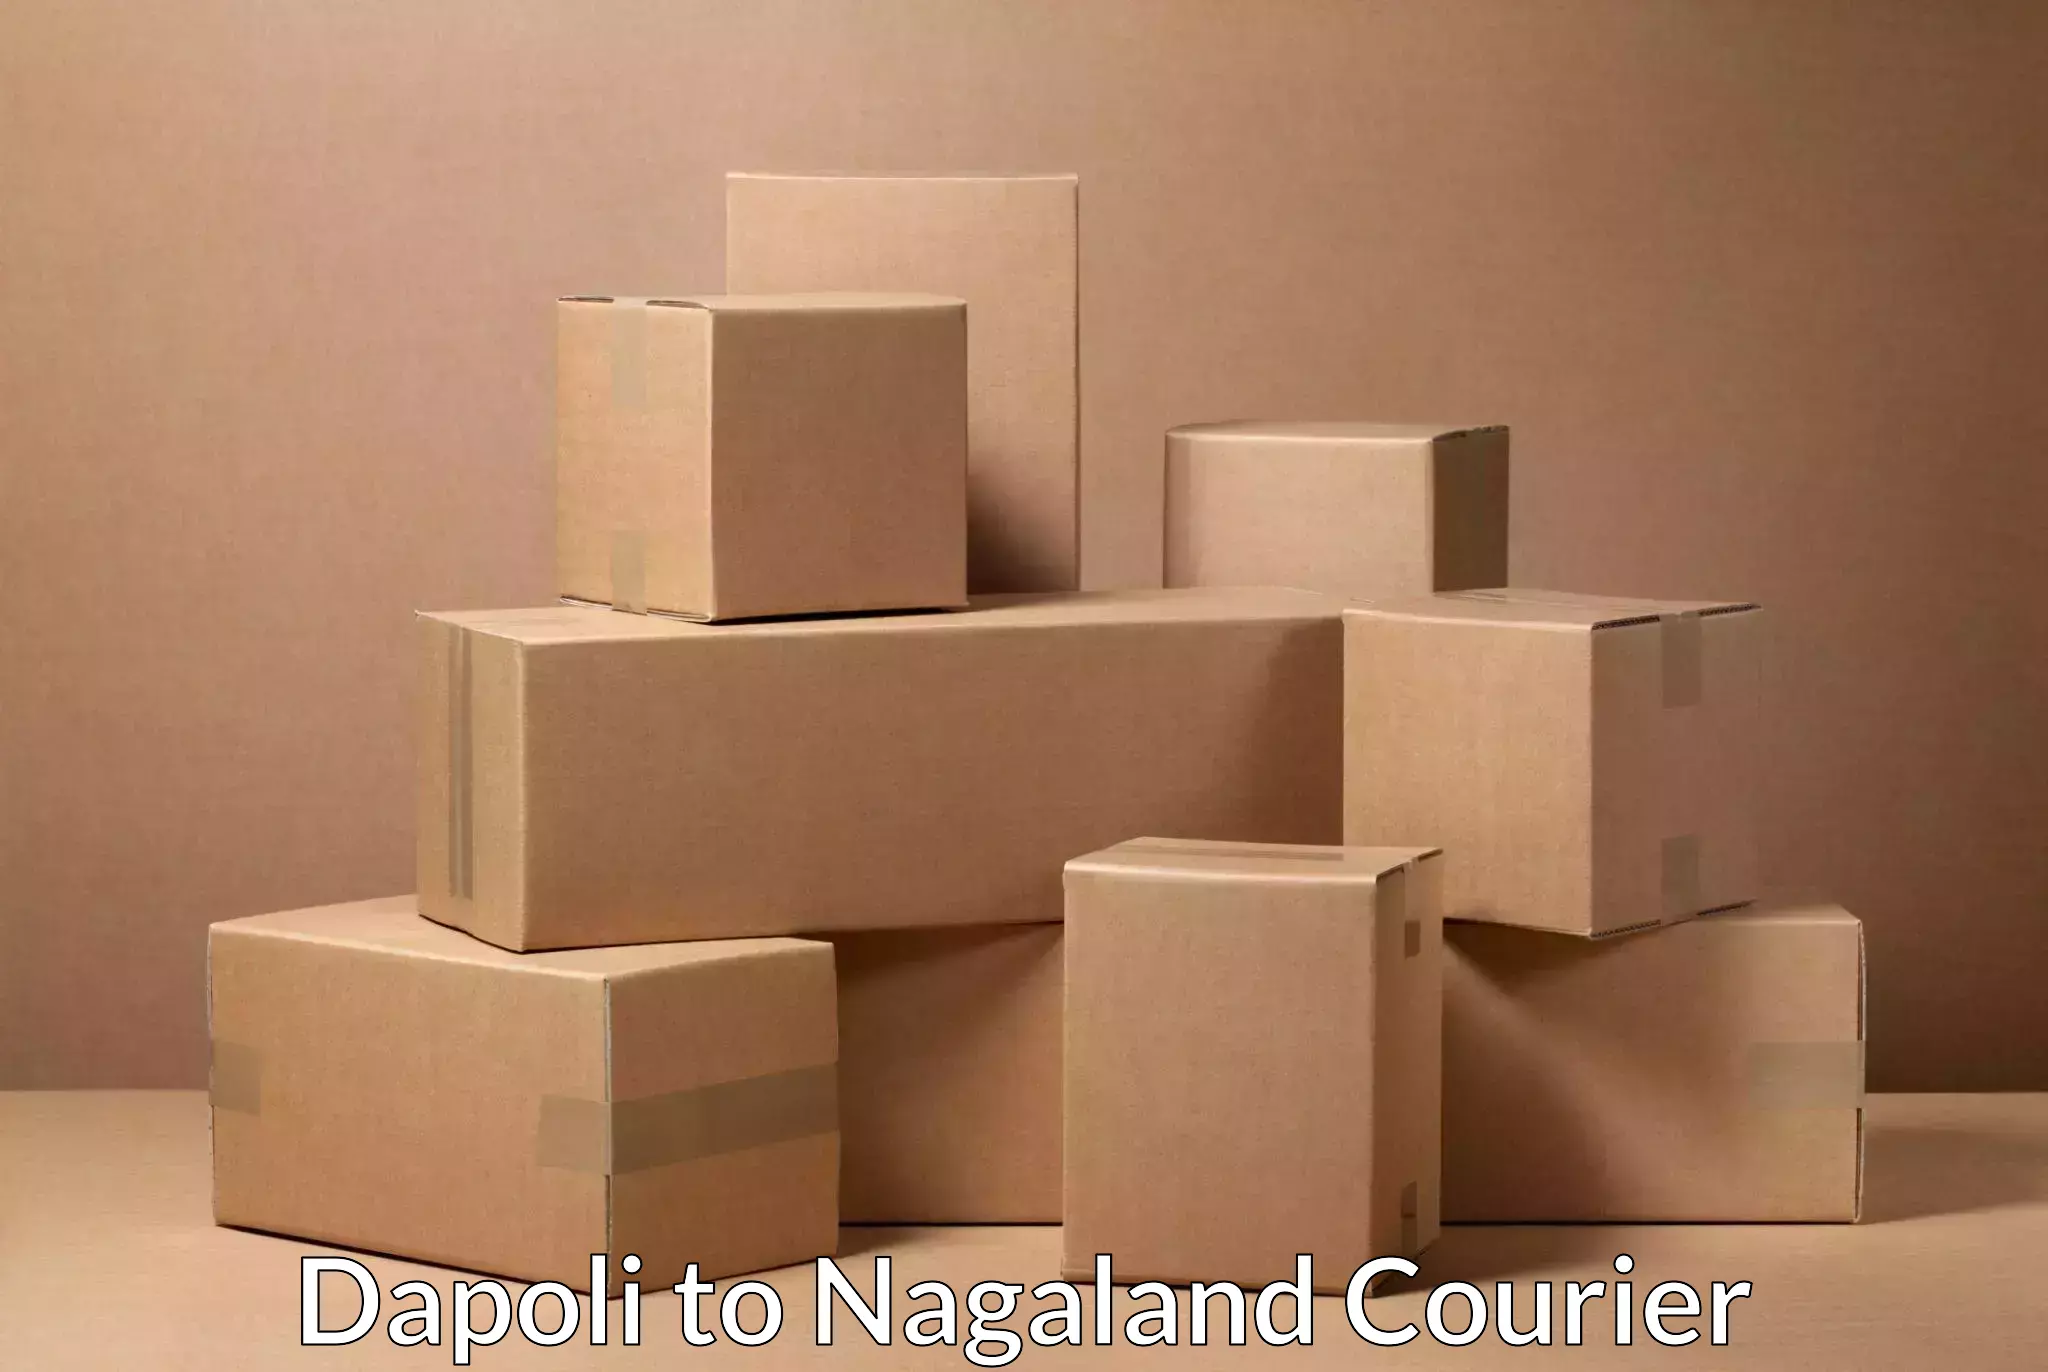 Sustainable delivery practices Dapoli to Nagaland